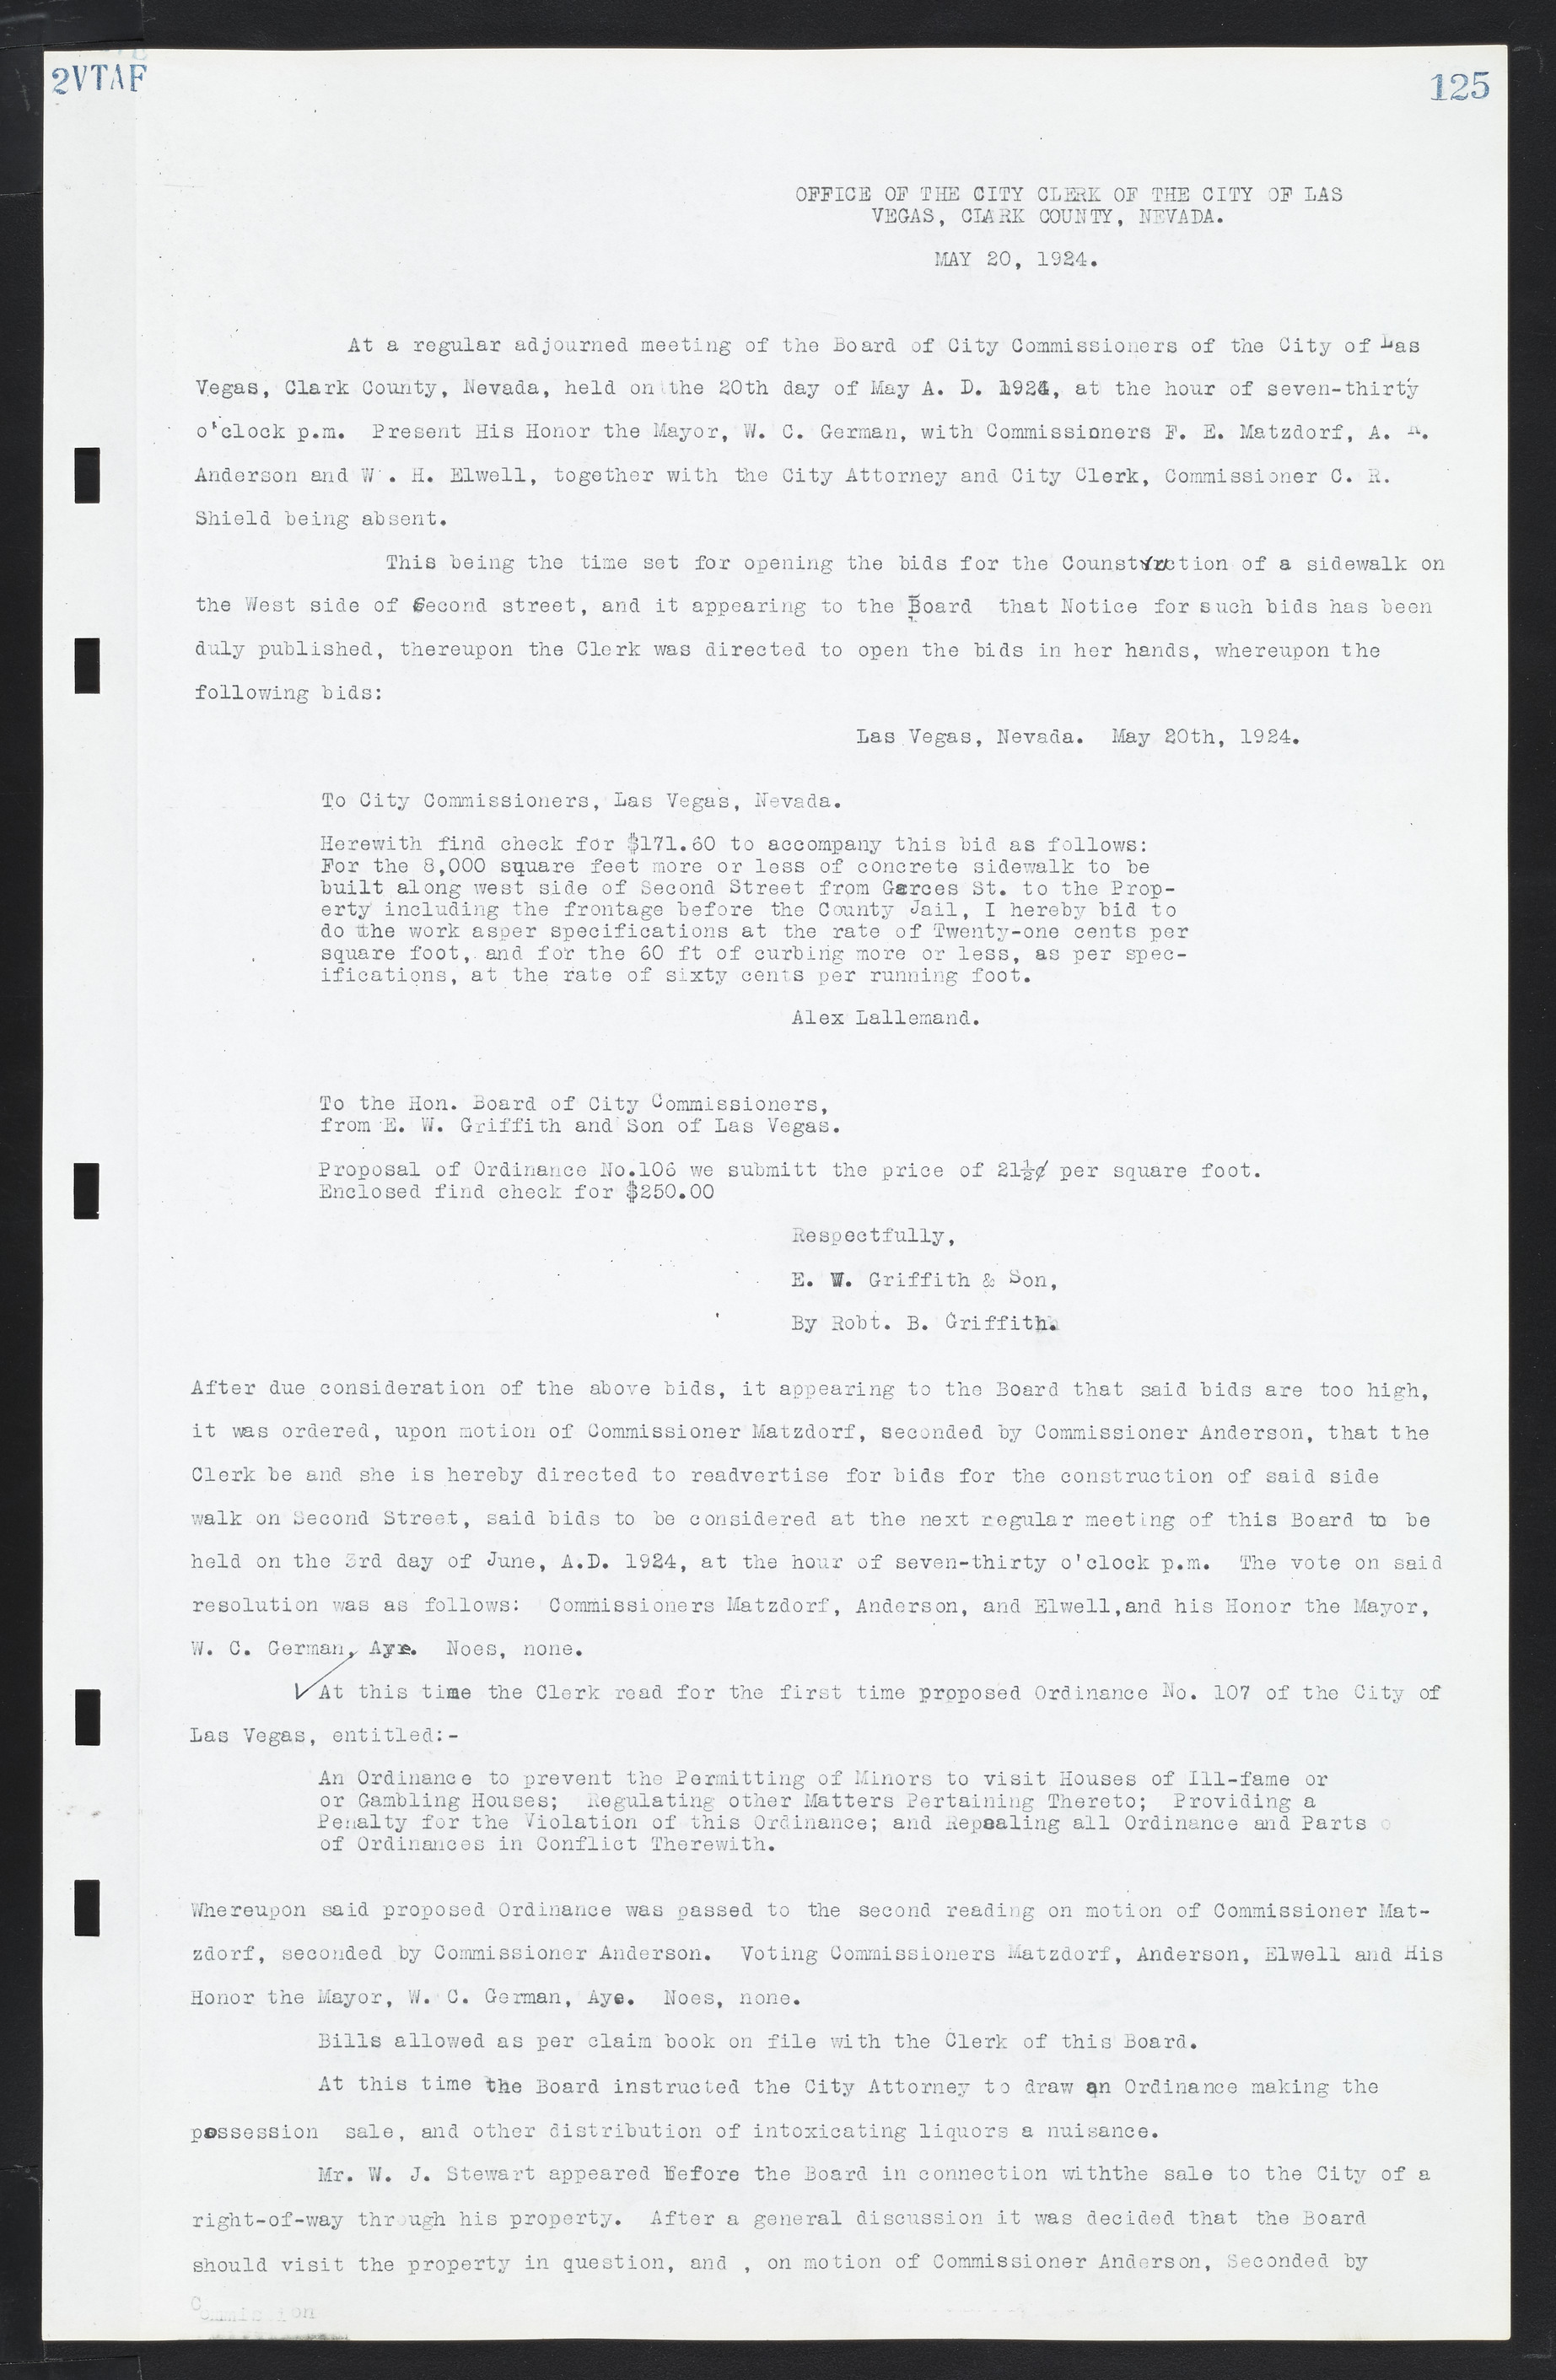 Las Vegas City Commission Minutes, March 1, 1922 to May 10, 1929, lvc000002-132